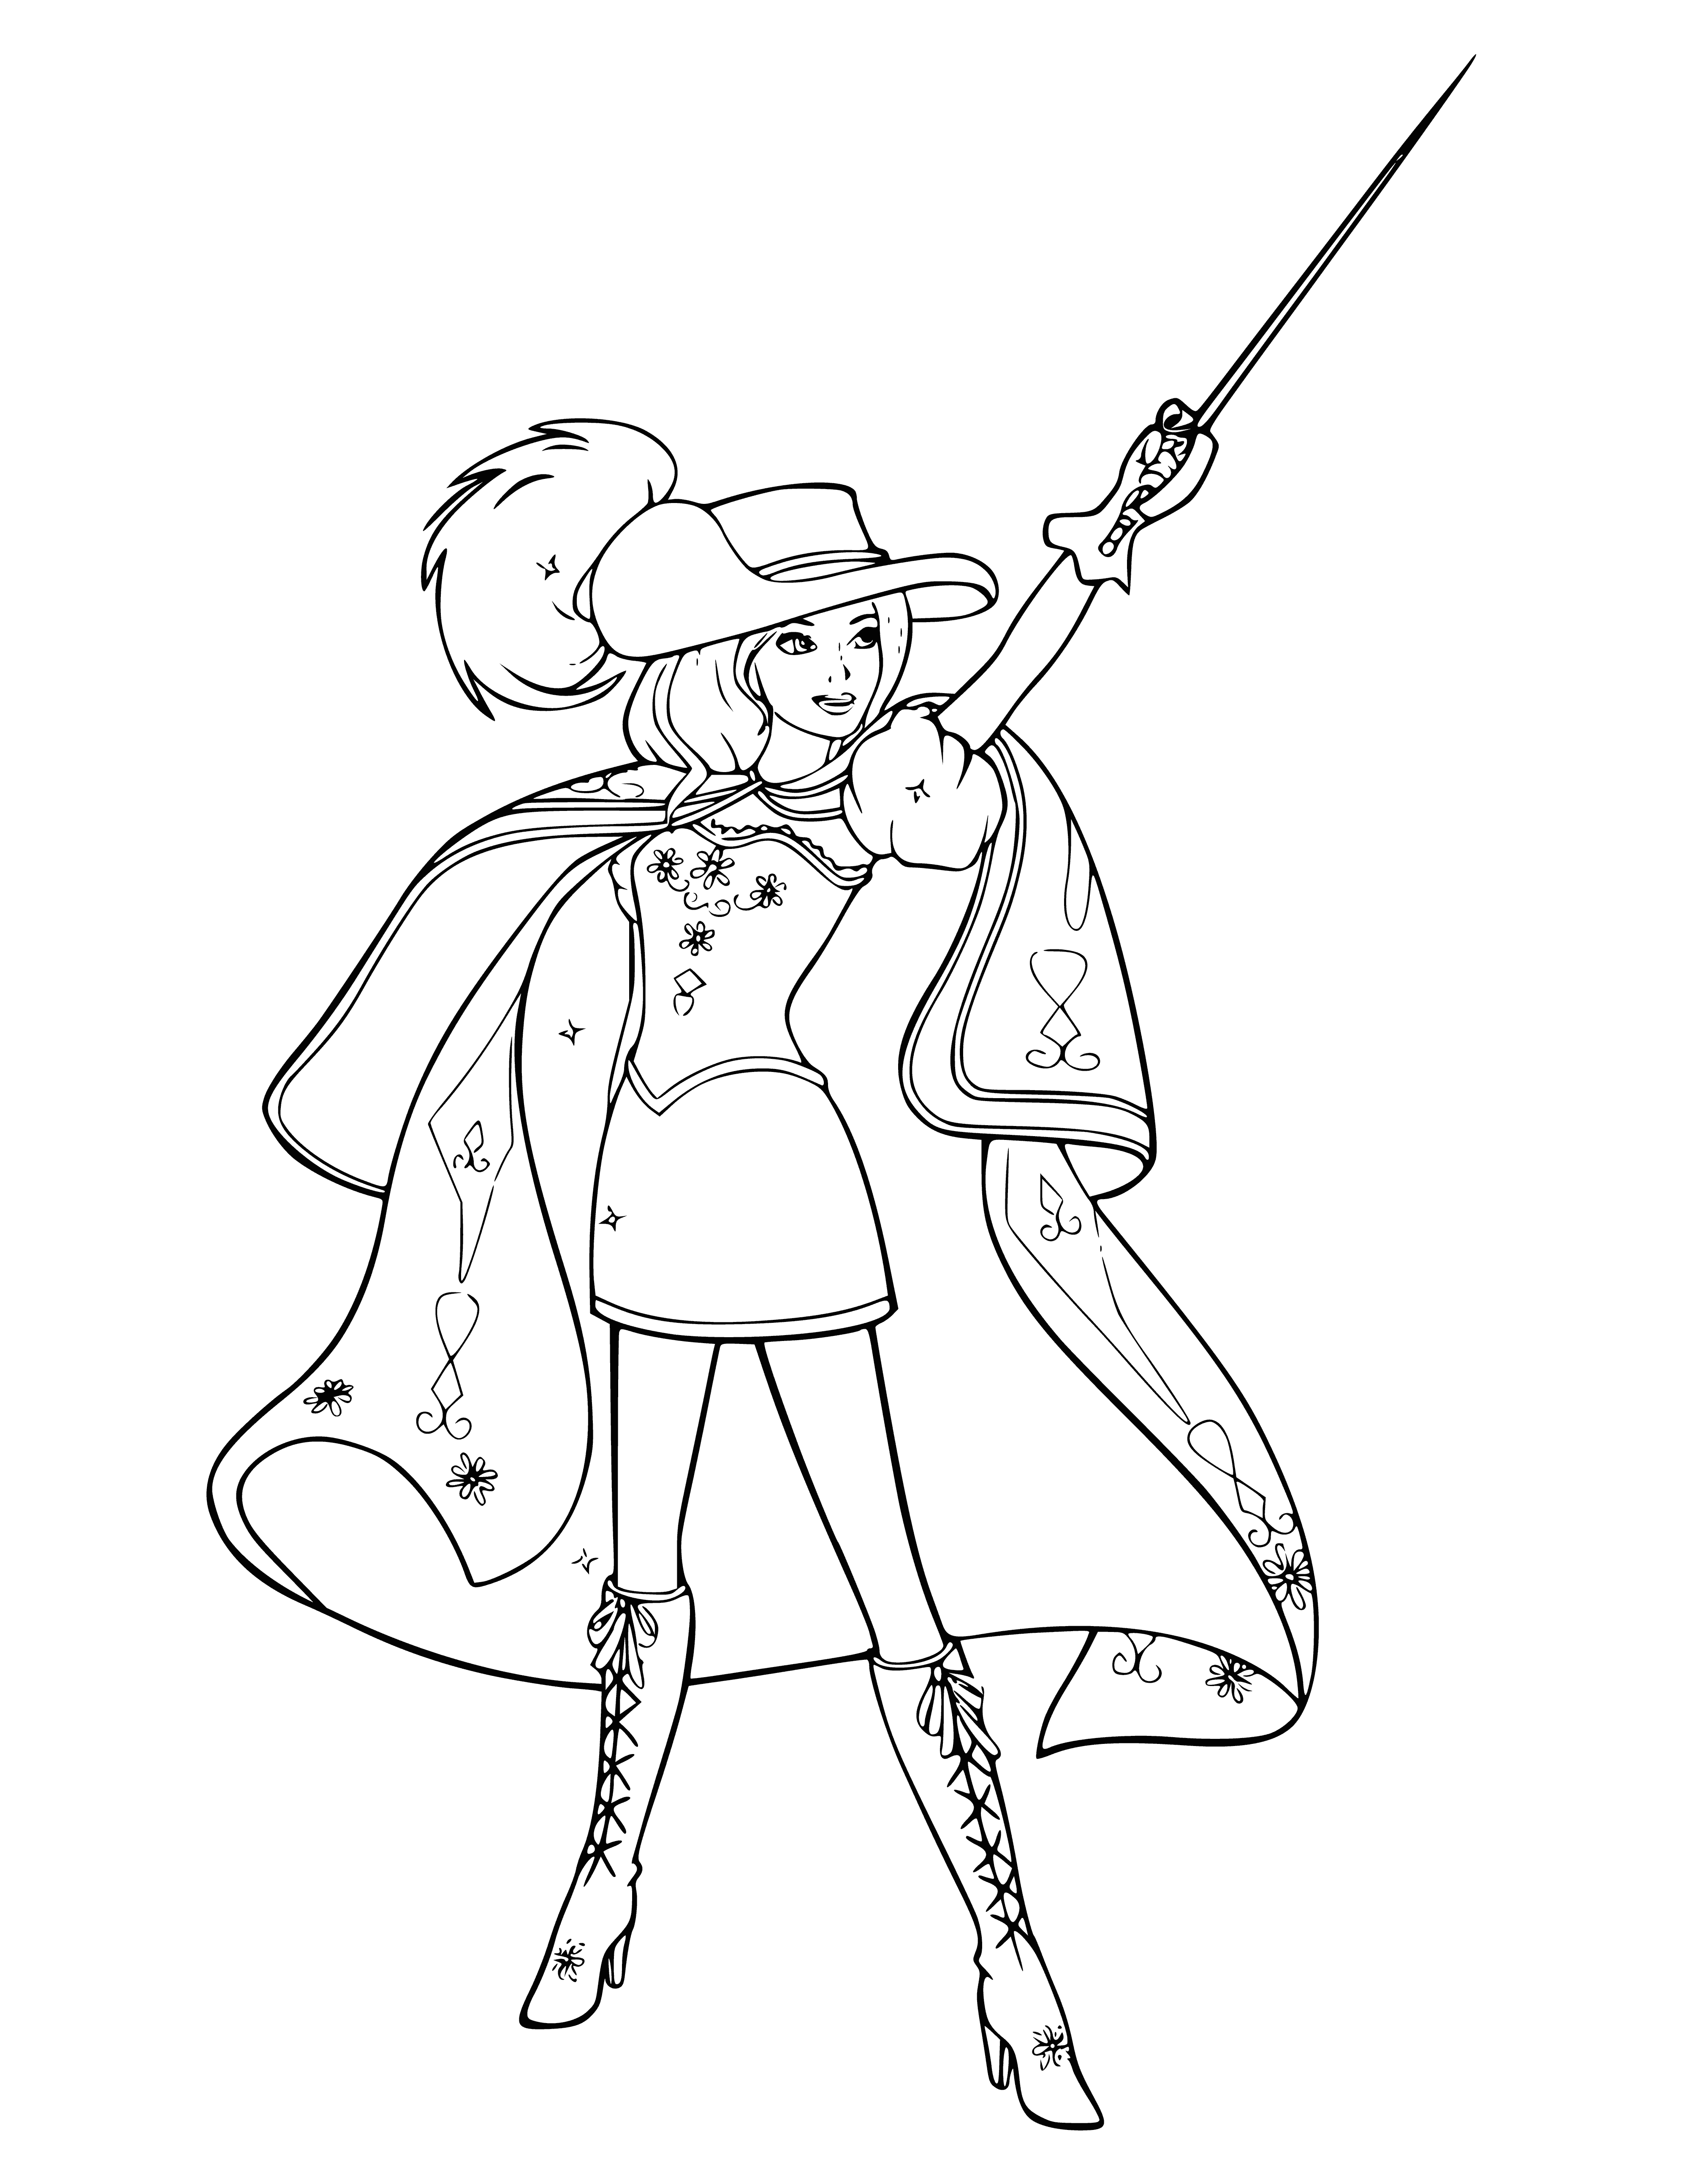 coloring page: Barbie dressed in musketeer costume: blue & white dress, gold belt, blue cape, holding sword & shield.